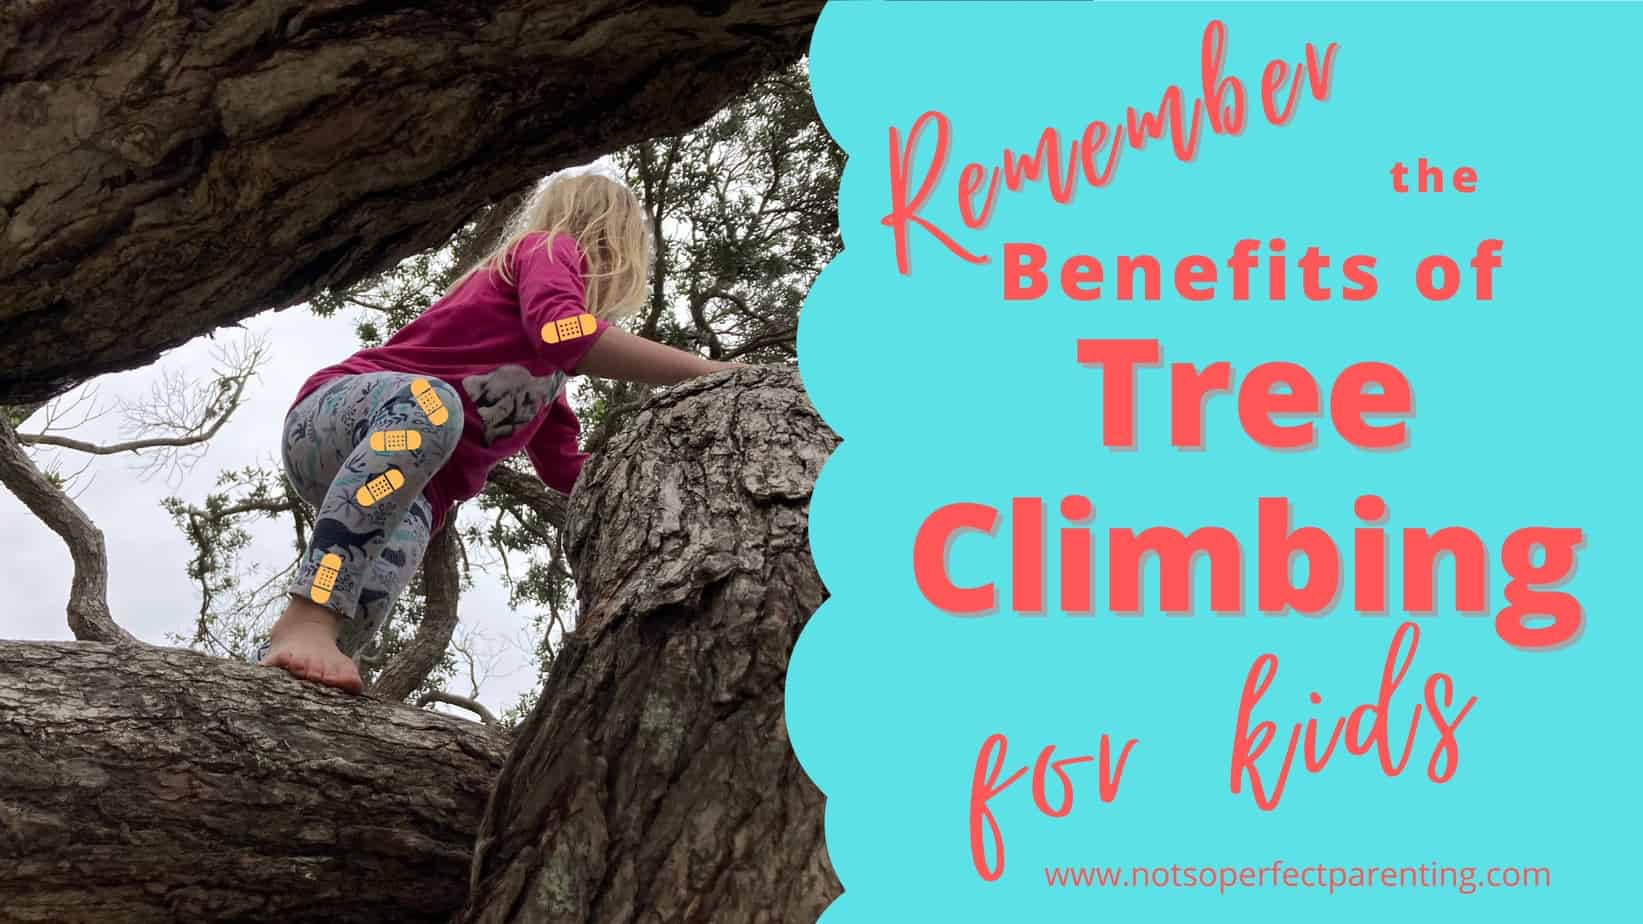 Tree climbing benefits for children. - Not So Perfect Parenting